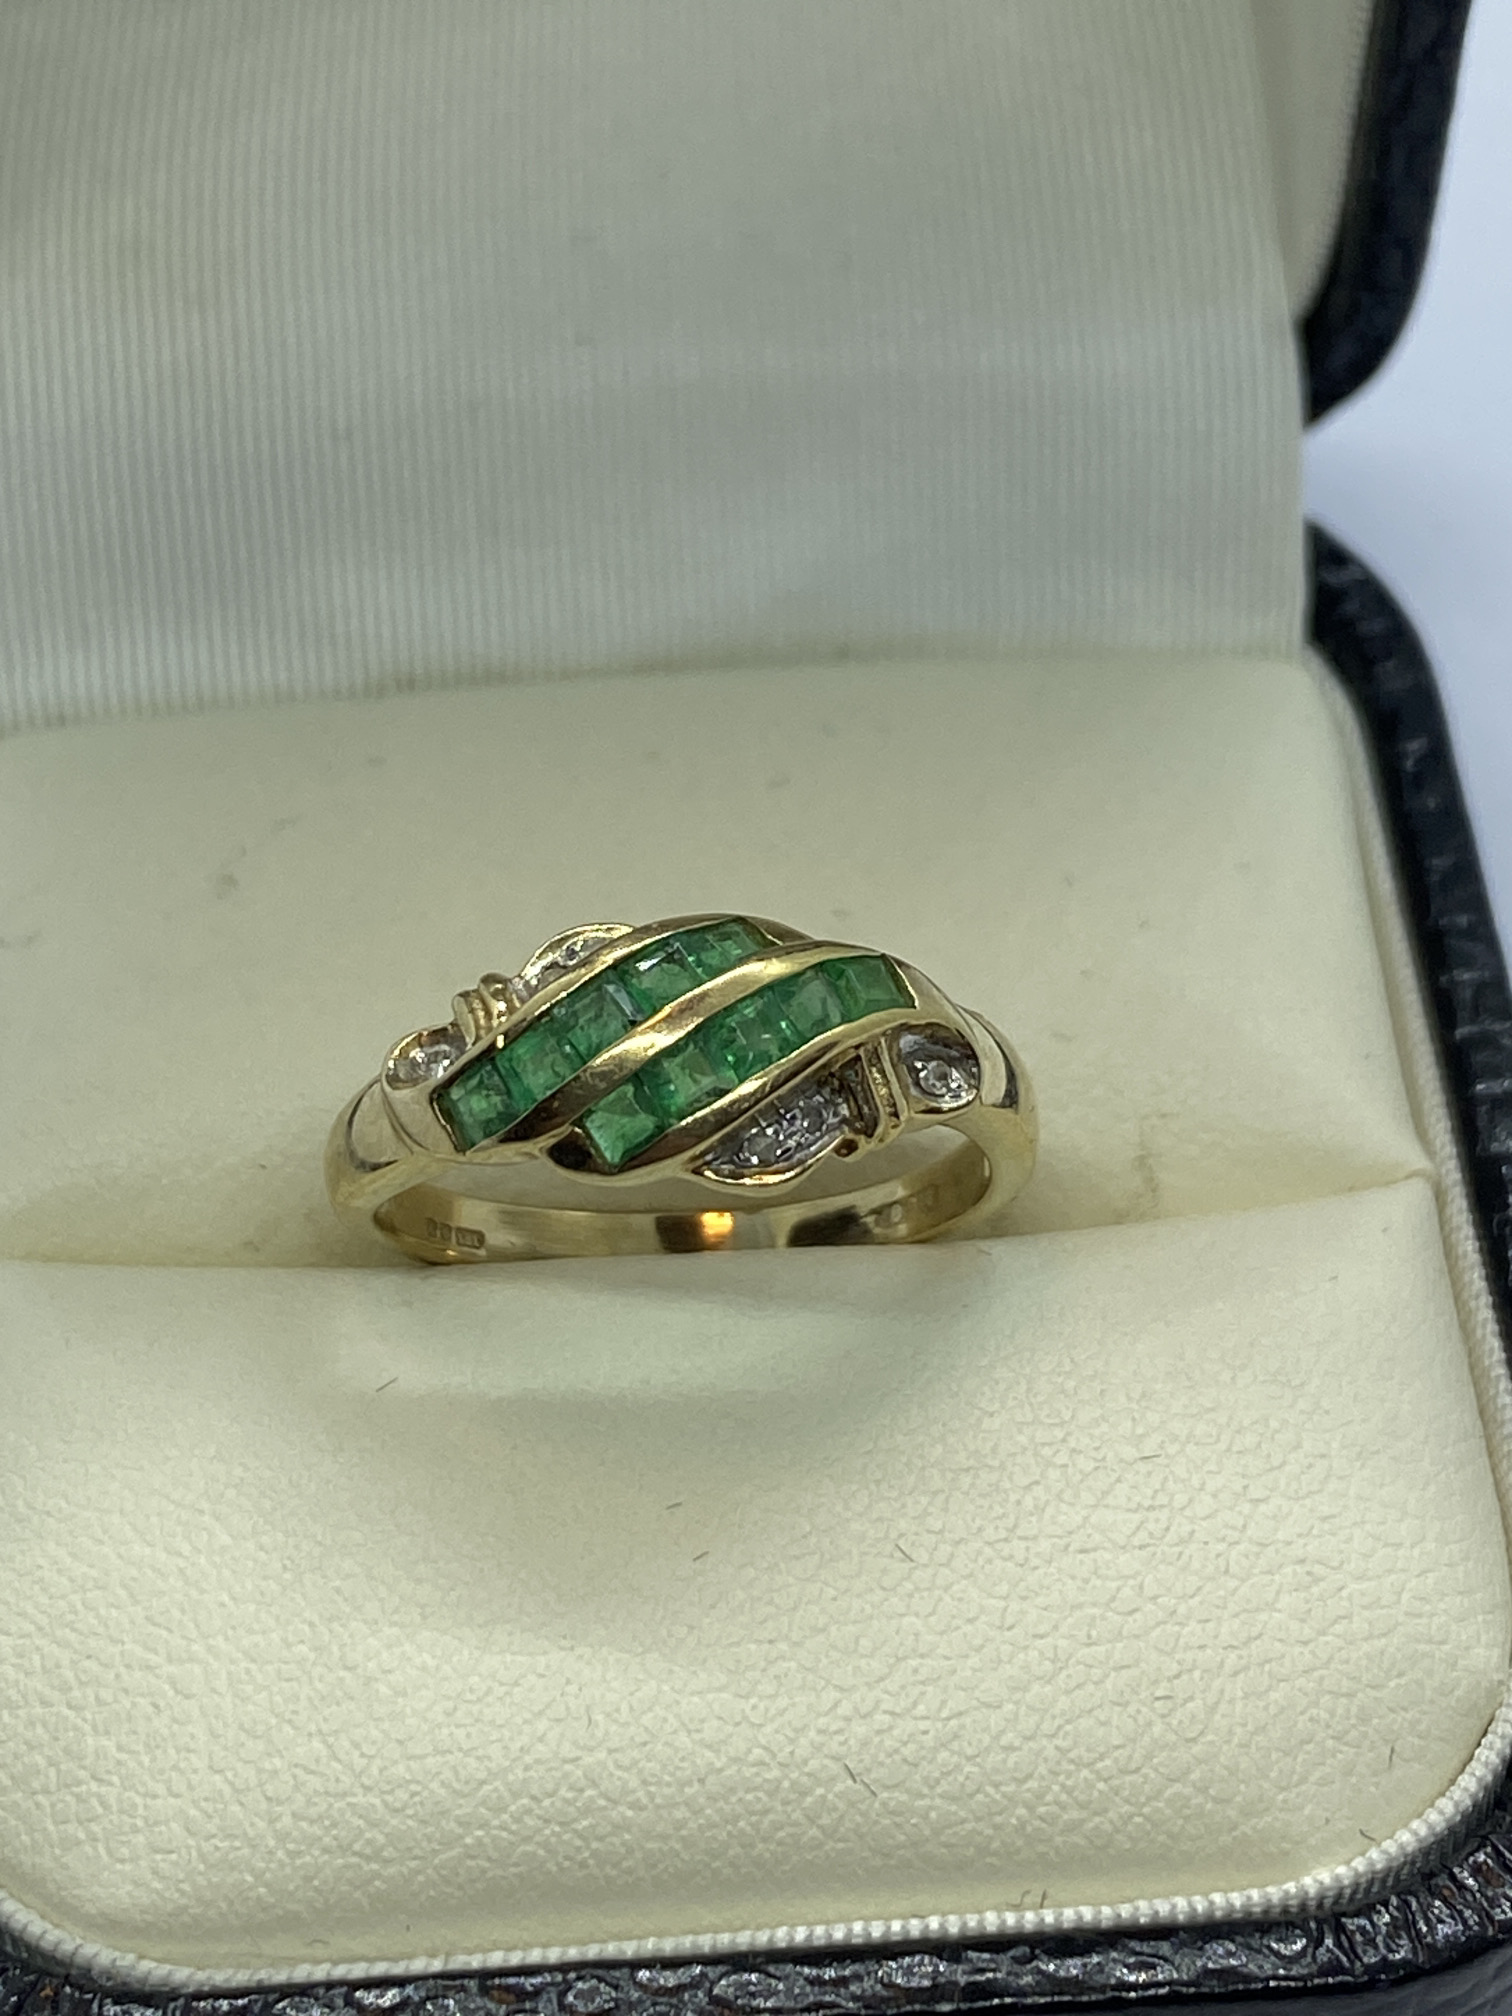 9ct YELLOW GOLD EMERALD AND DIAMOND RING APPROX. WEIGHT 2.00g APPROX. SIZE K 1/2